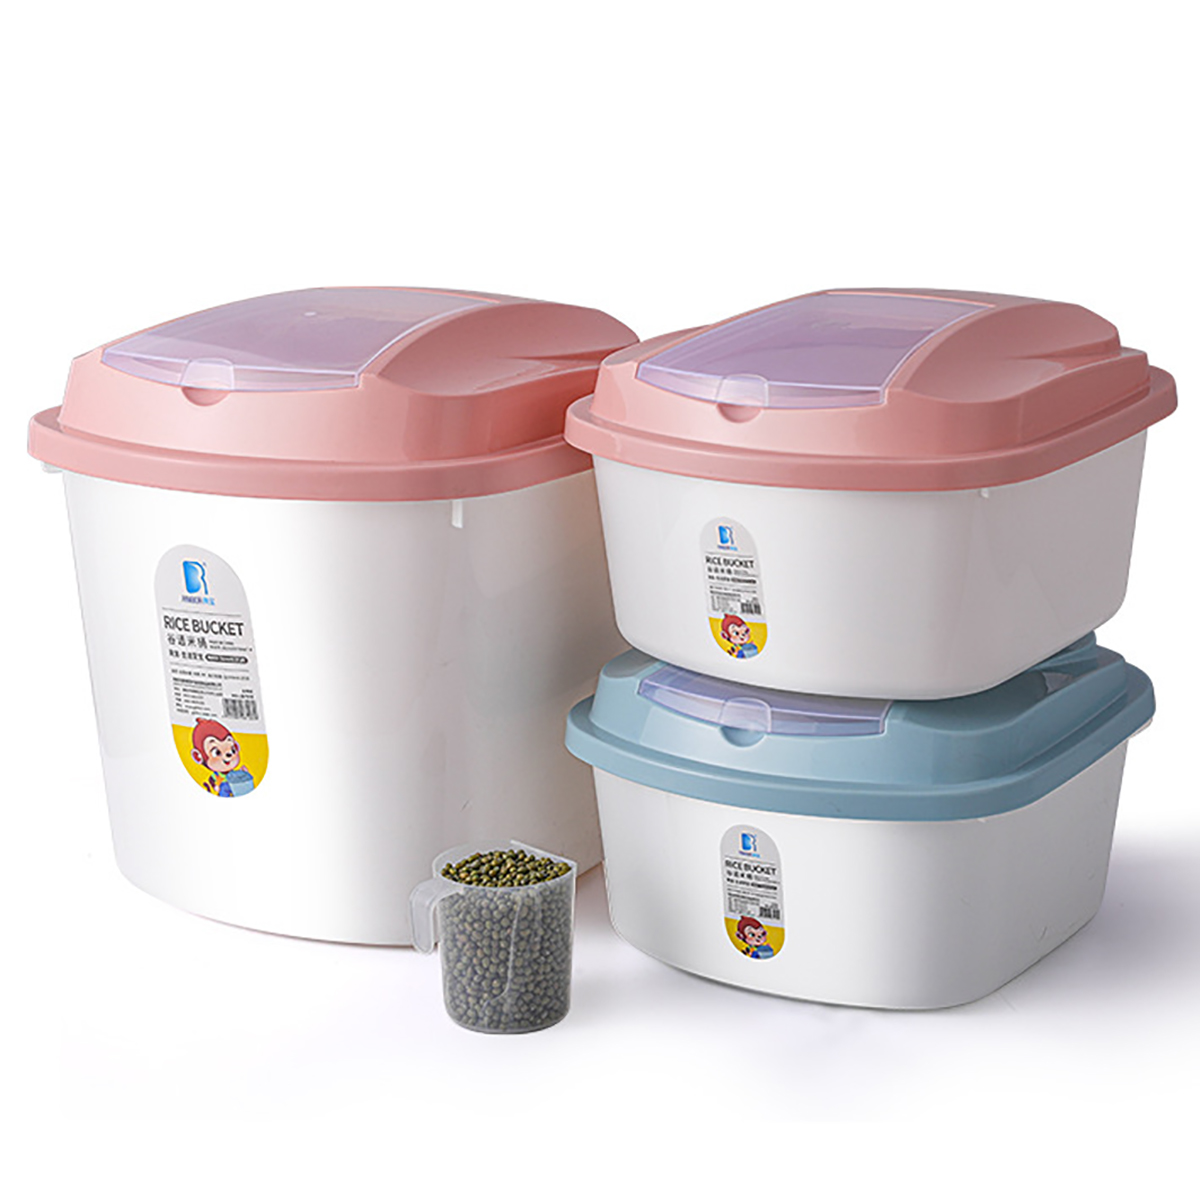 Airtight-Pet-Food-Storage-Container-Rice-Bucket-Storage-Container-Box-for-Storing-Rice-Flour-Dry-Foo-1857848-11